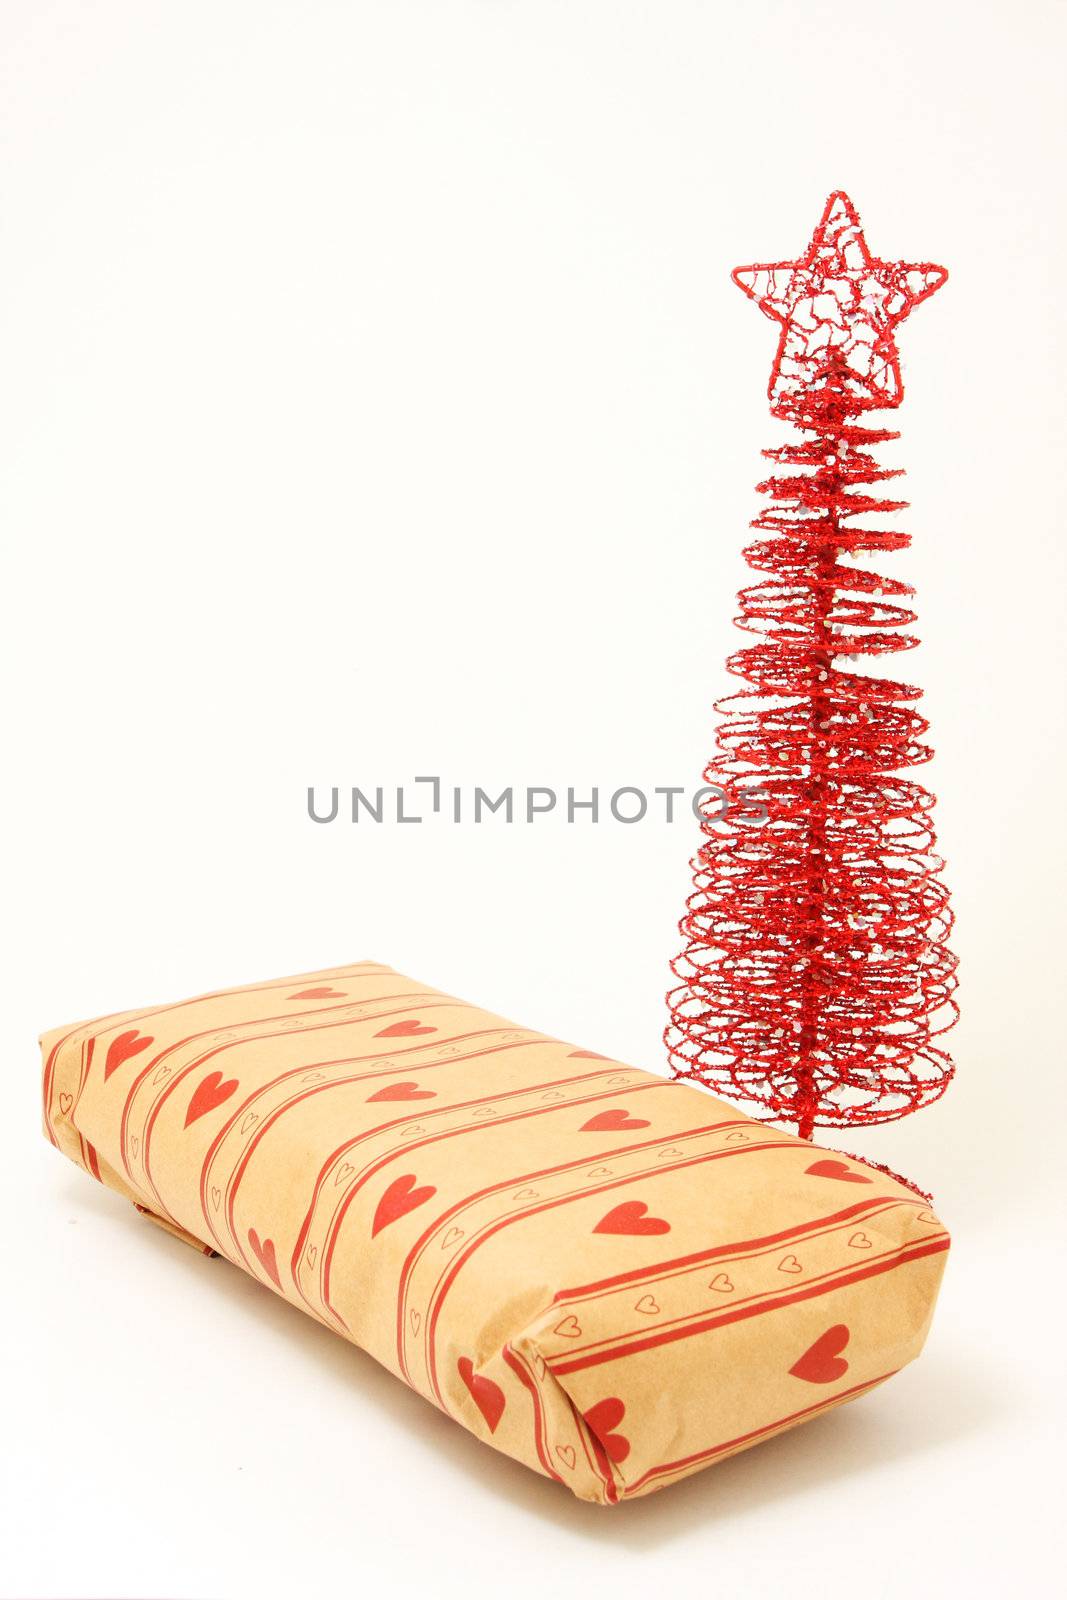 A wrapped present and red ornamental christmas tree shot on white, isolated and background intentionally blown out